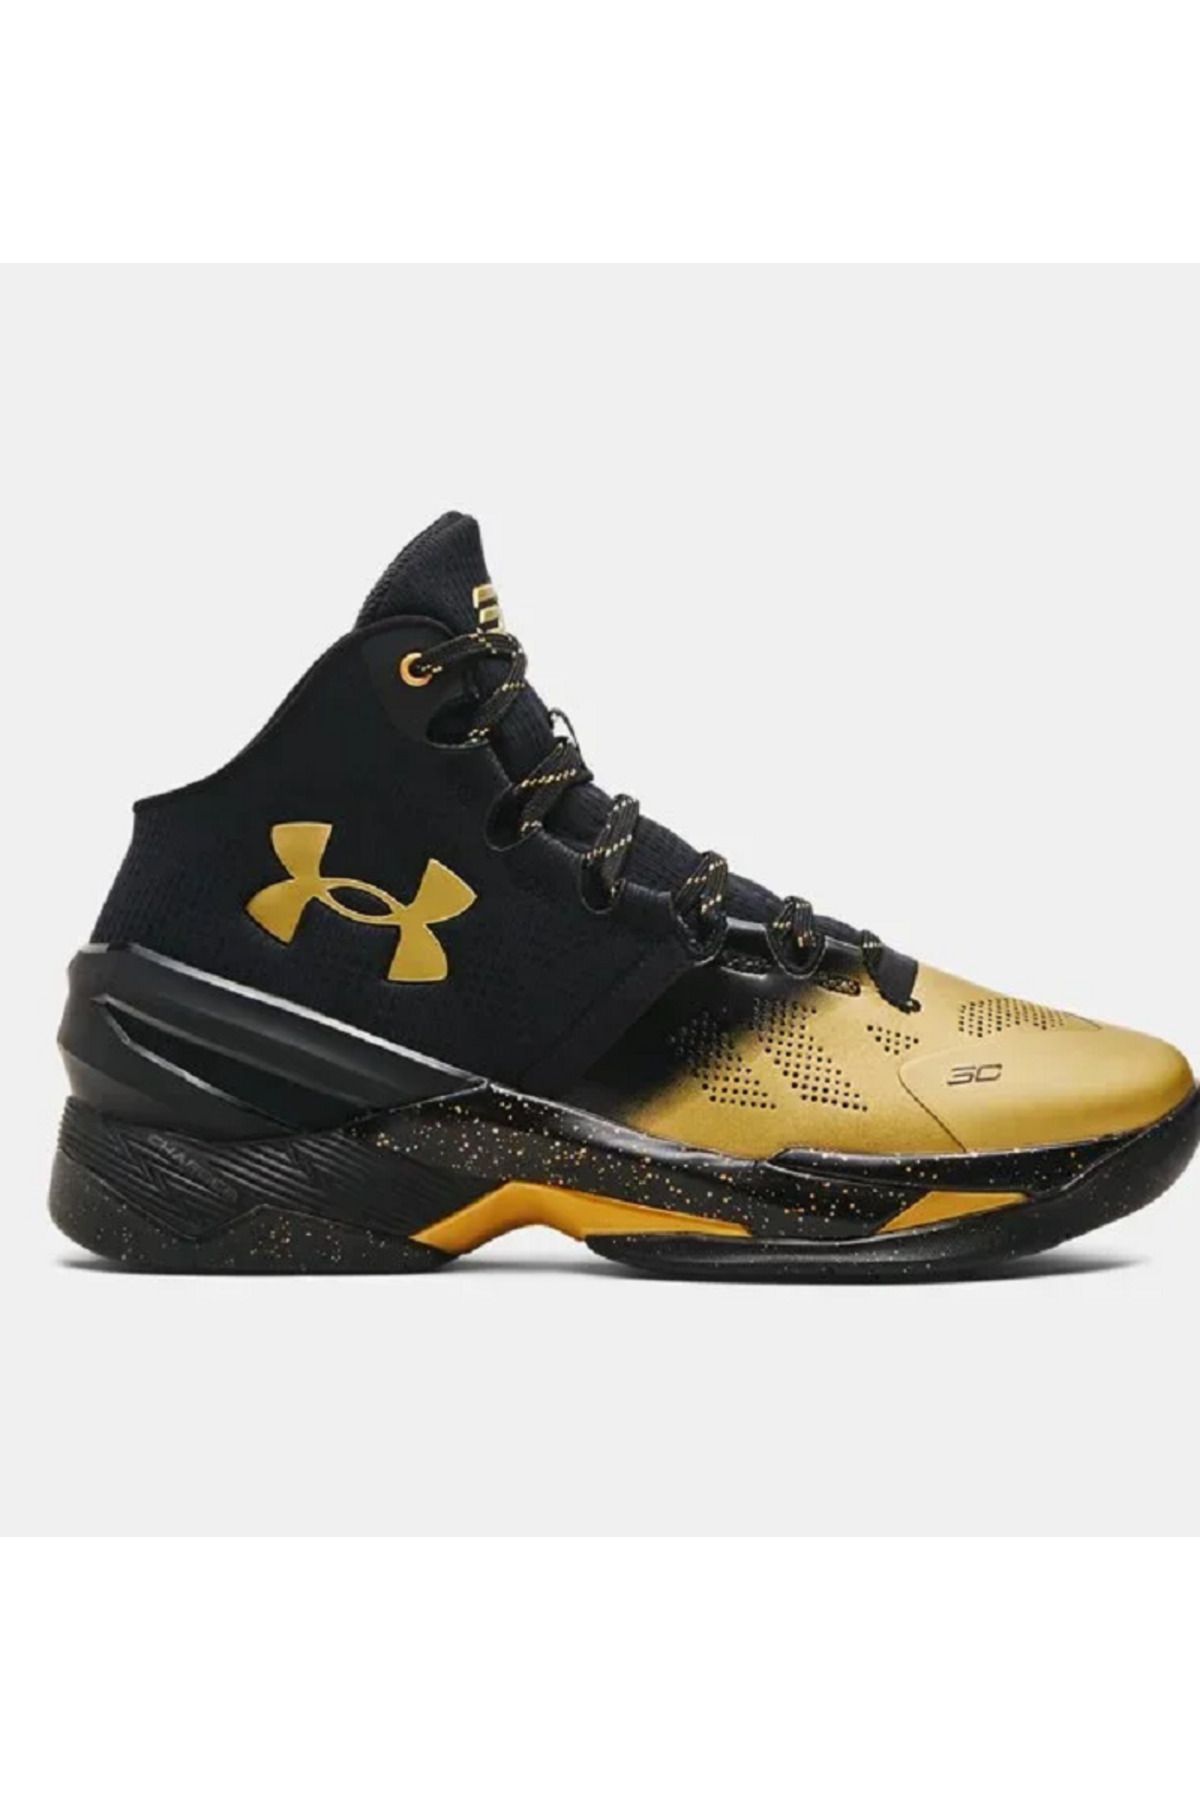 Under Armour Curry 2 Unanimous Basketbol Ayakkabısı Erkek Basketbol Ayakkabısı